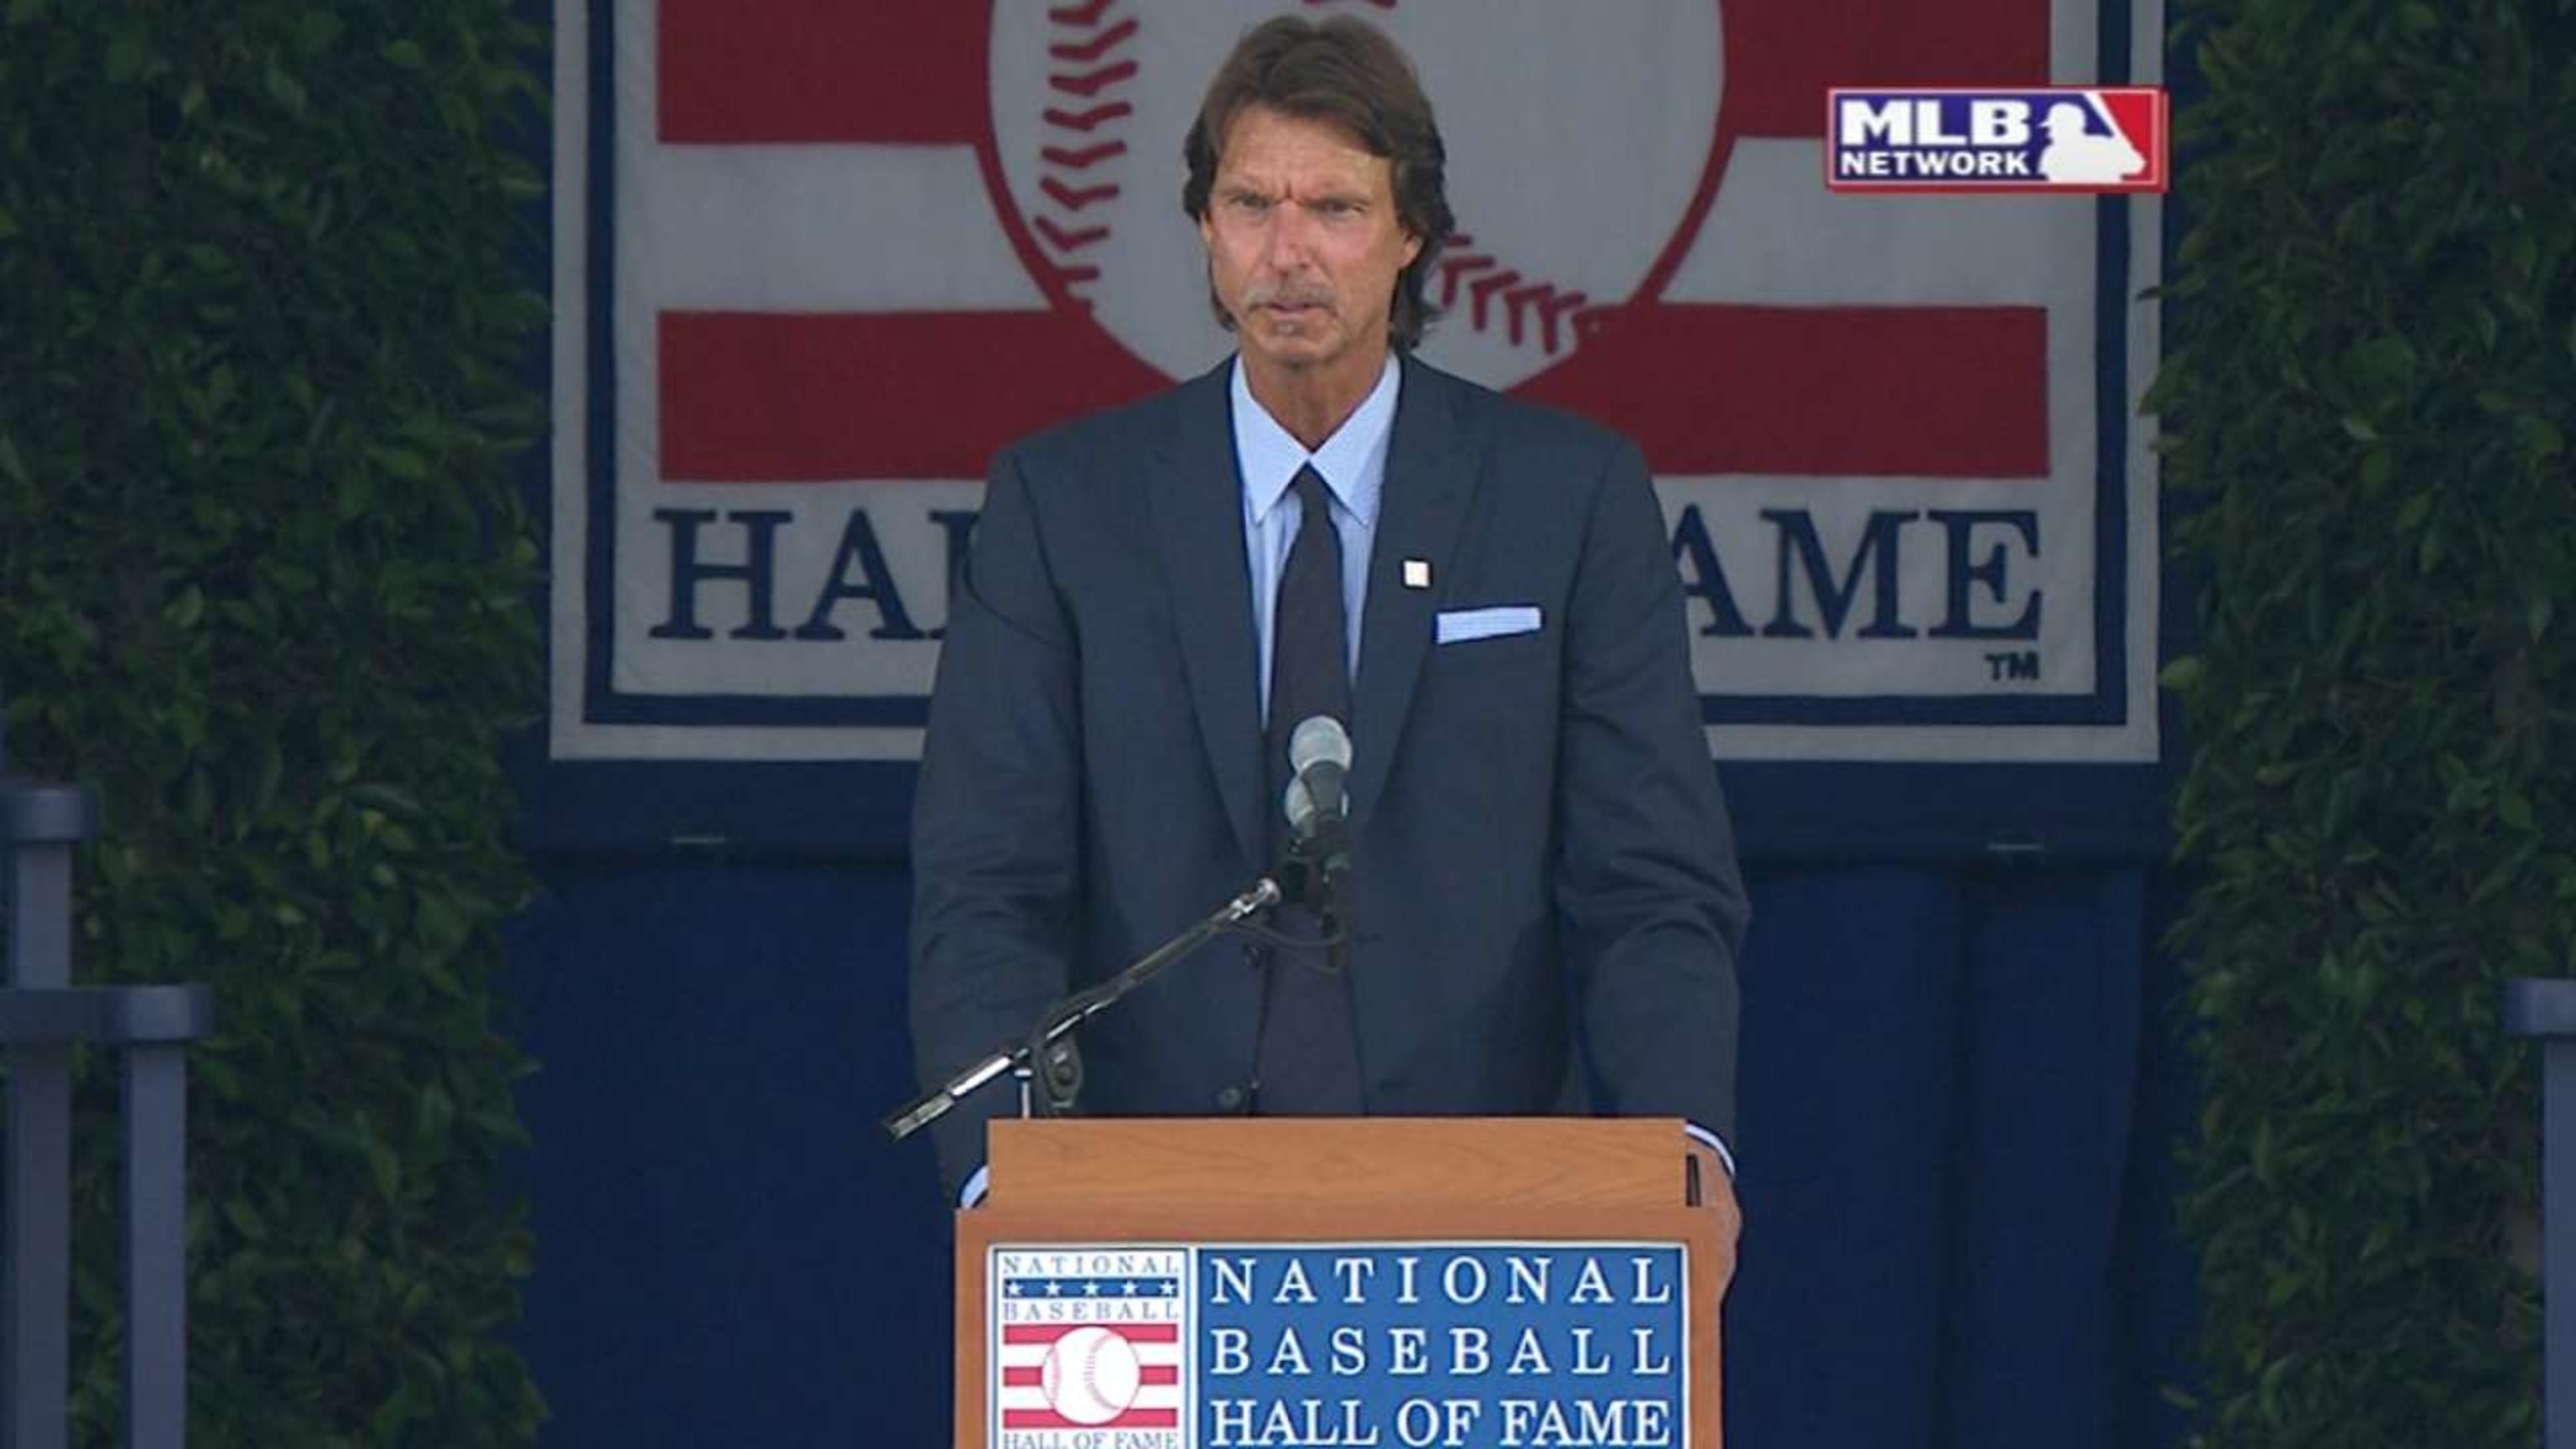 On anniversary of perfect game, Randy Johnson's intensity stands out